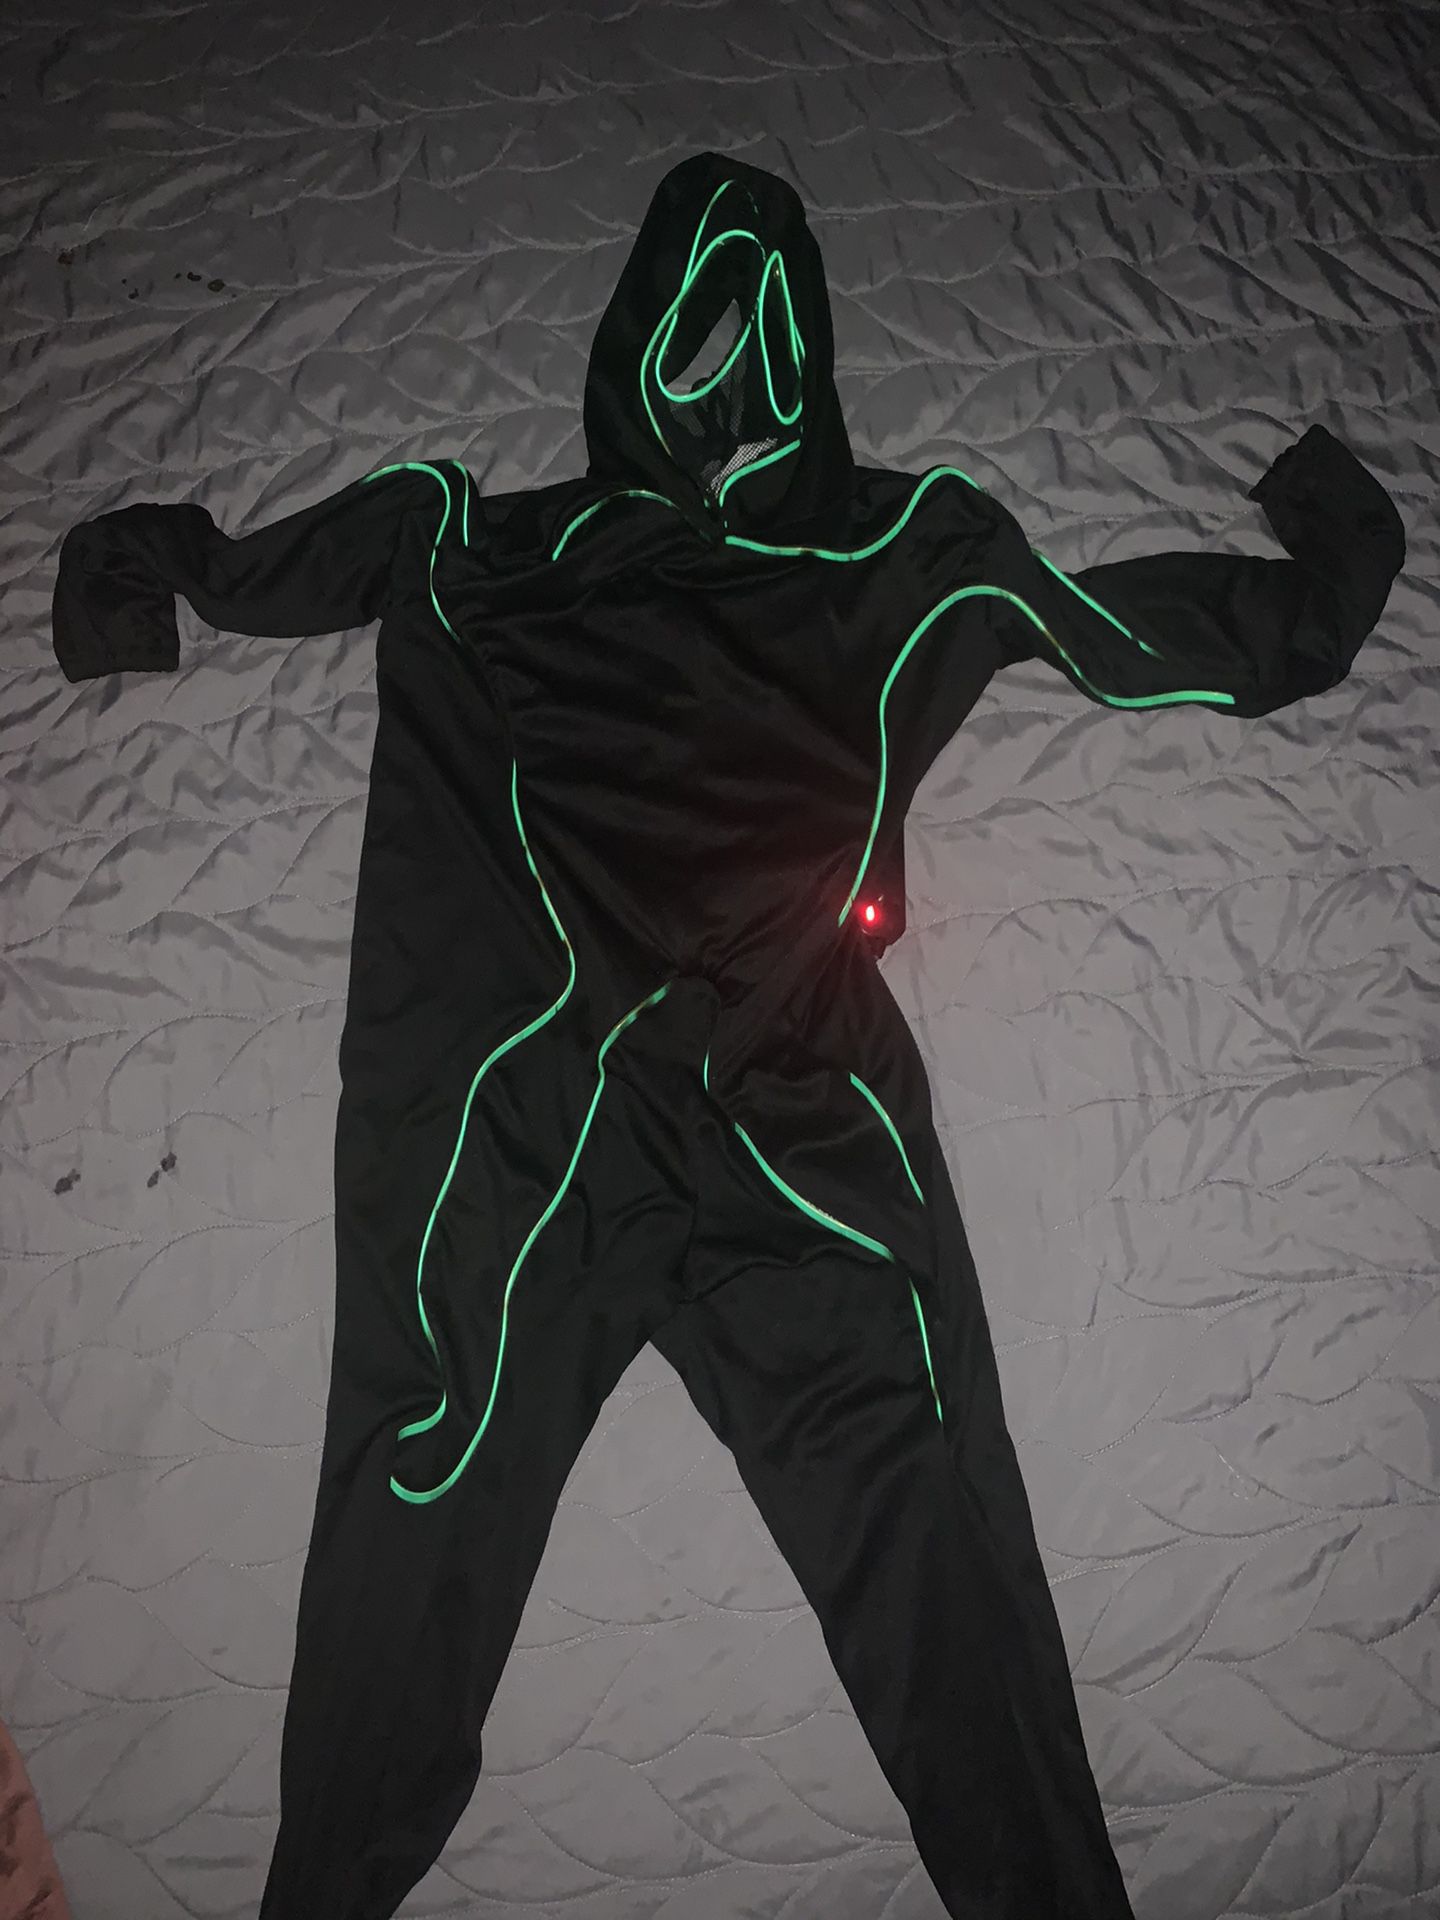 Childs Light Up Halloween Costume (Check Out All My Other Halloween Costumes!)